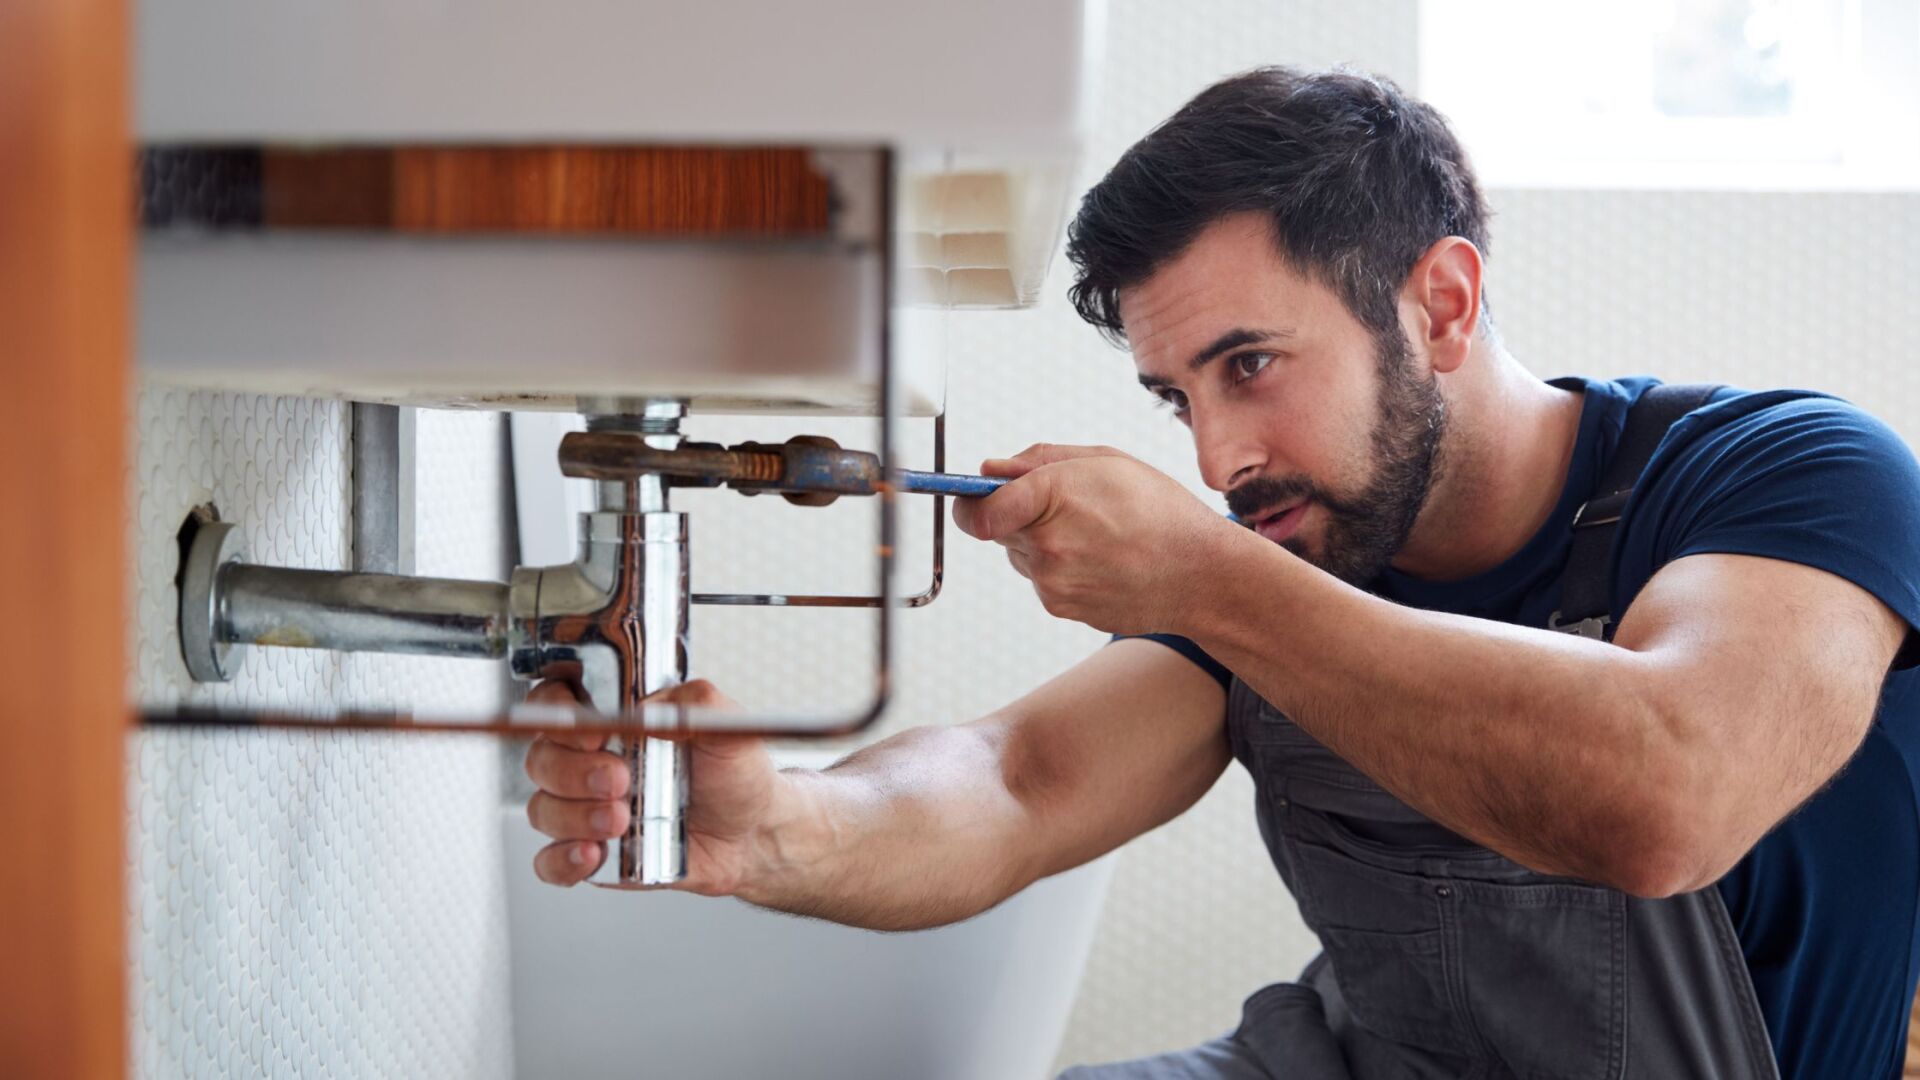 Plumber fixing a kichen sink with a plumbing wrench for an emercency call out